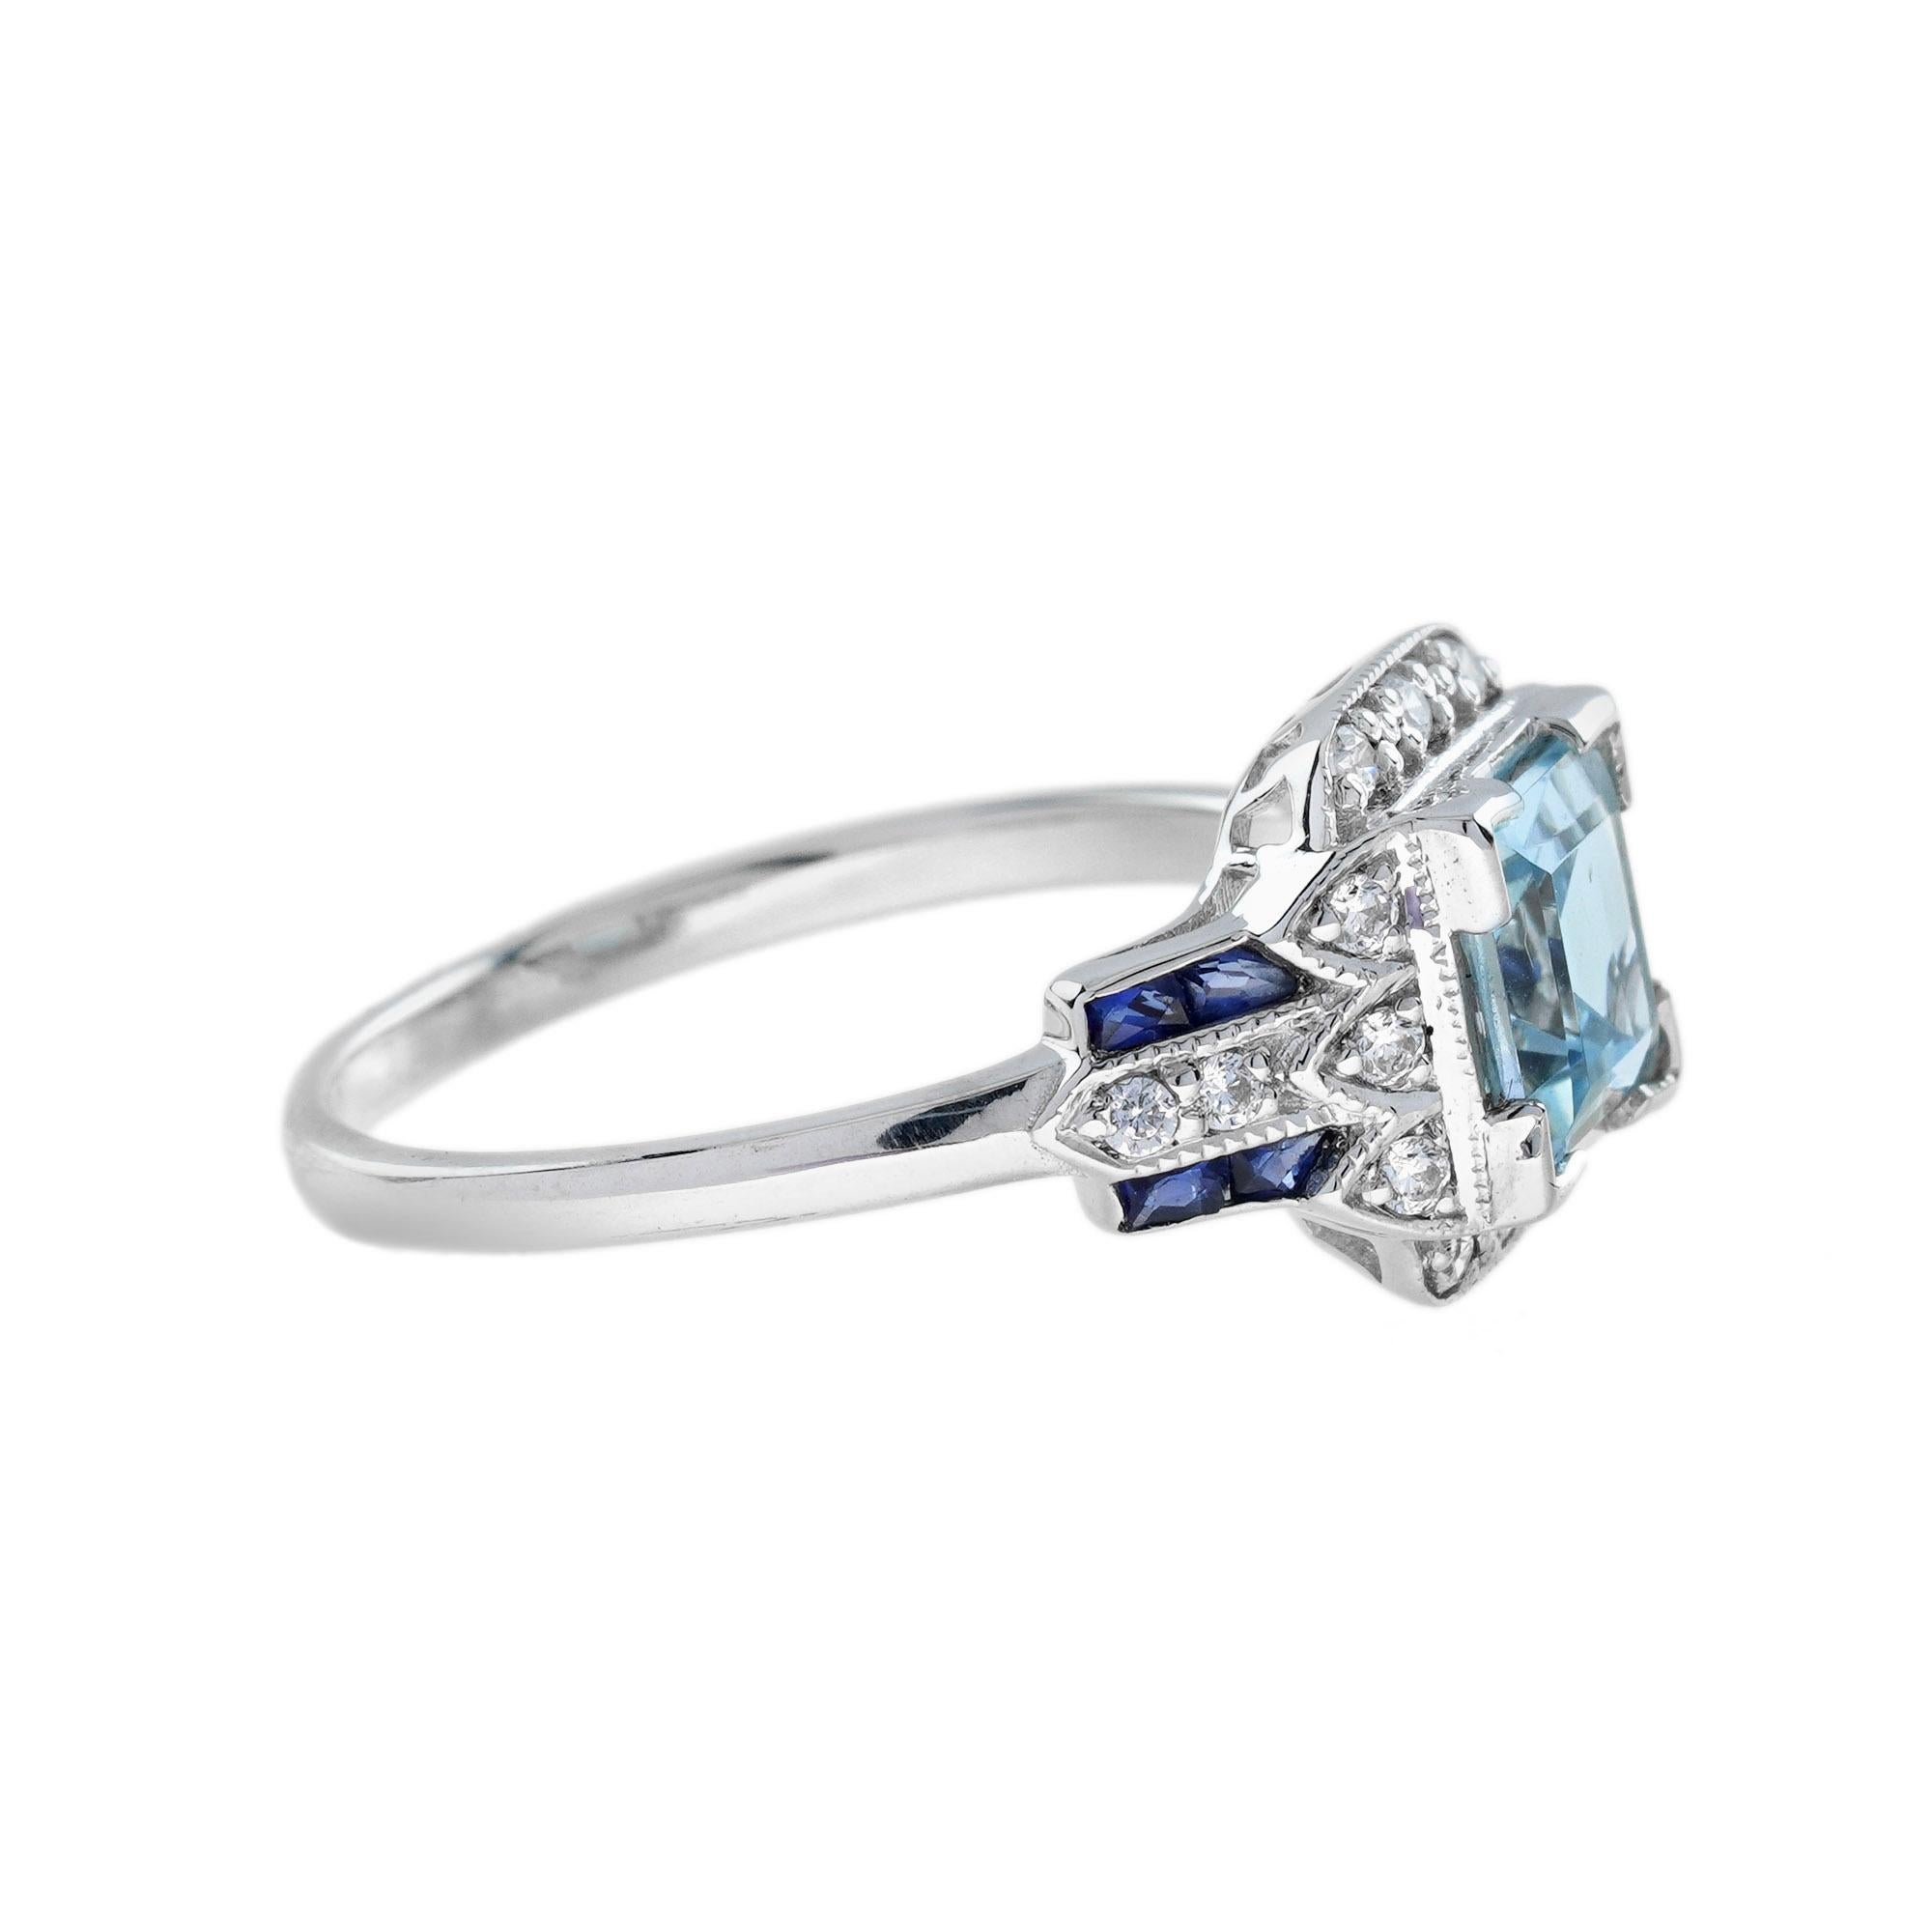 For Sale:  Square Blue Topaz Sapphire Diamond Art Deco Style Engagement Ring in 14K Gold 4